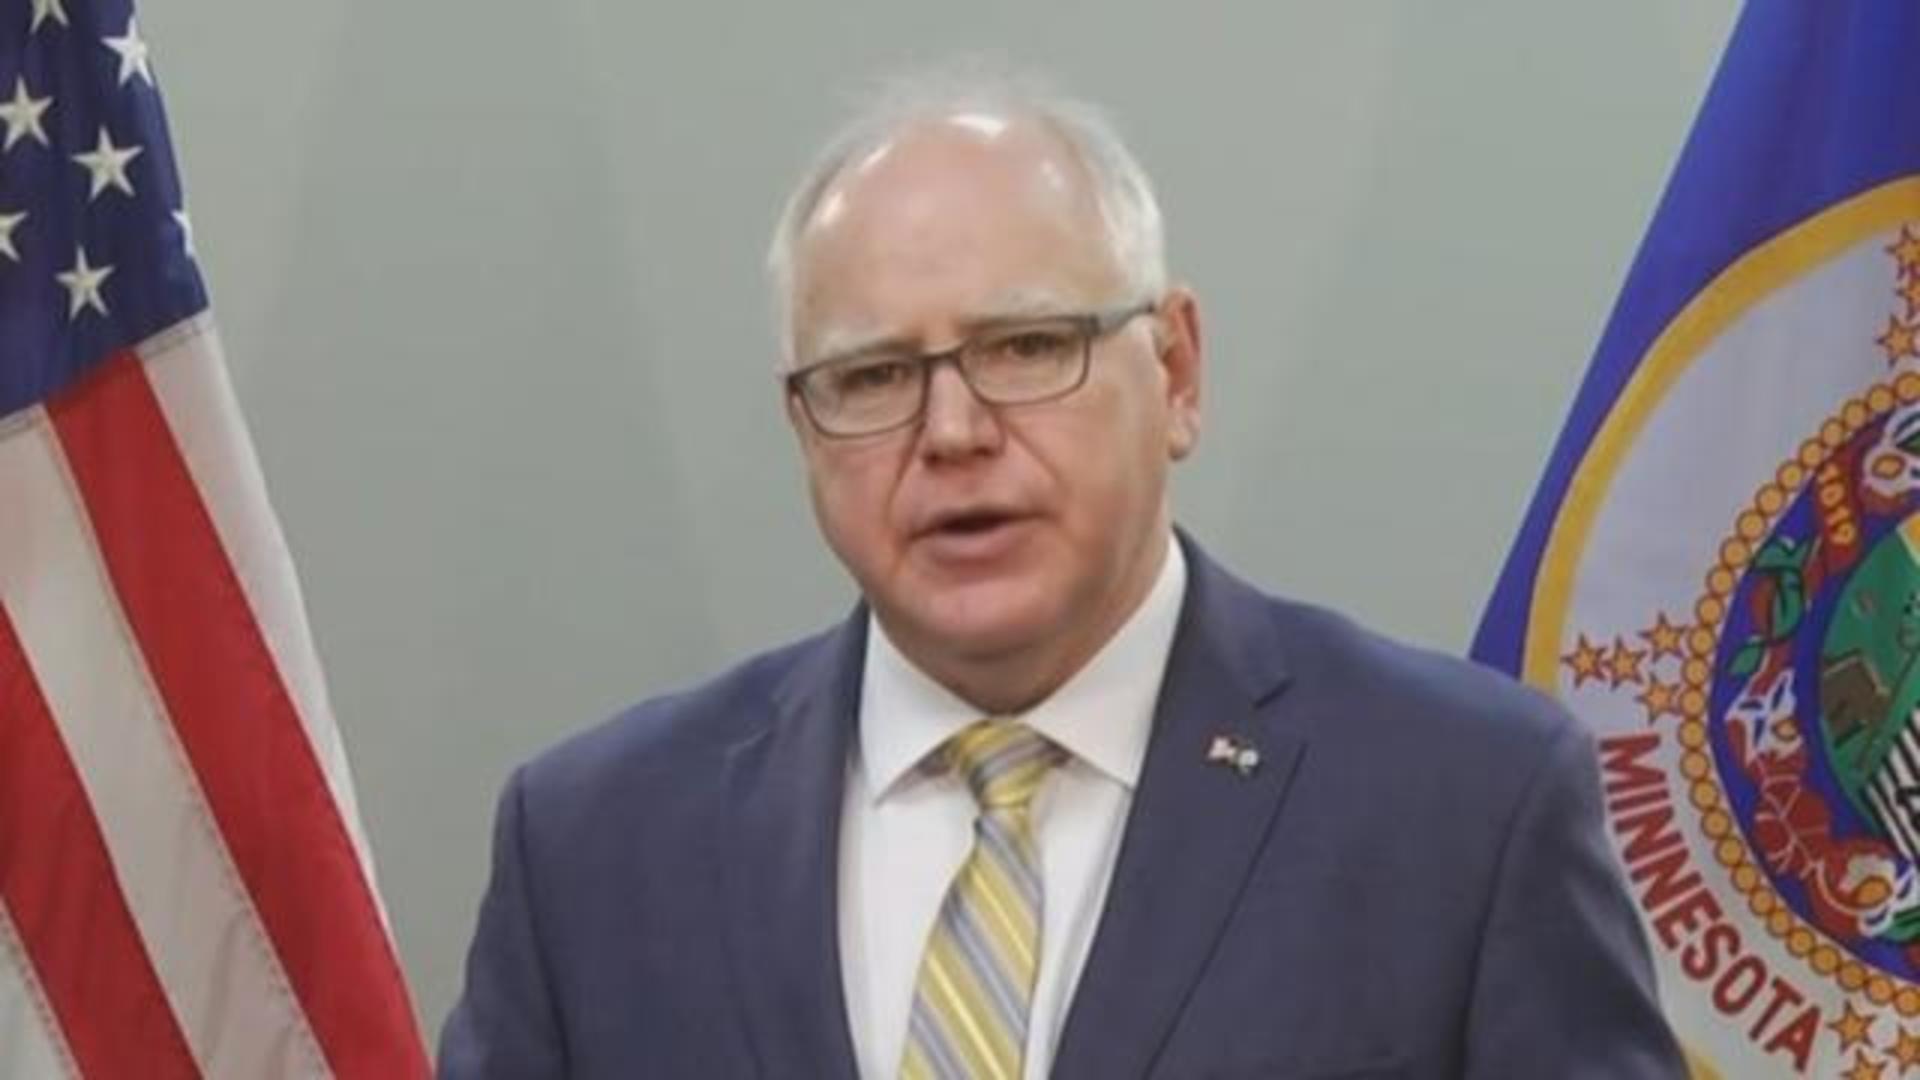 cbsn fusion minnesota governor tim walz eases covid restrictions thumbnail 666884